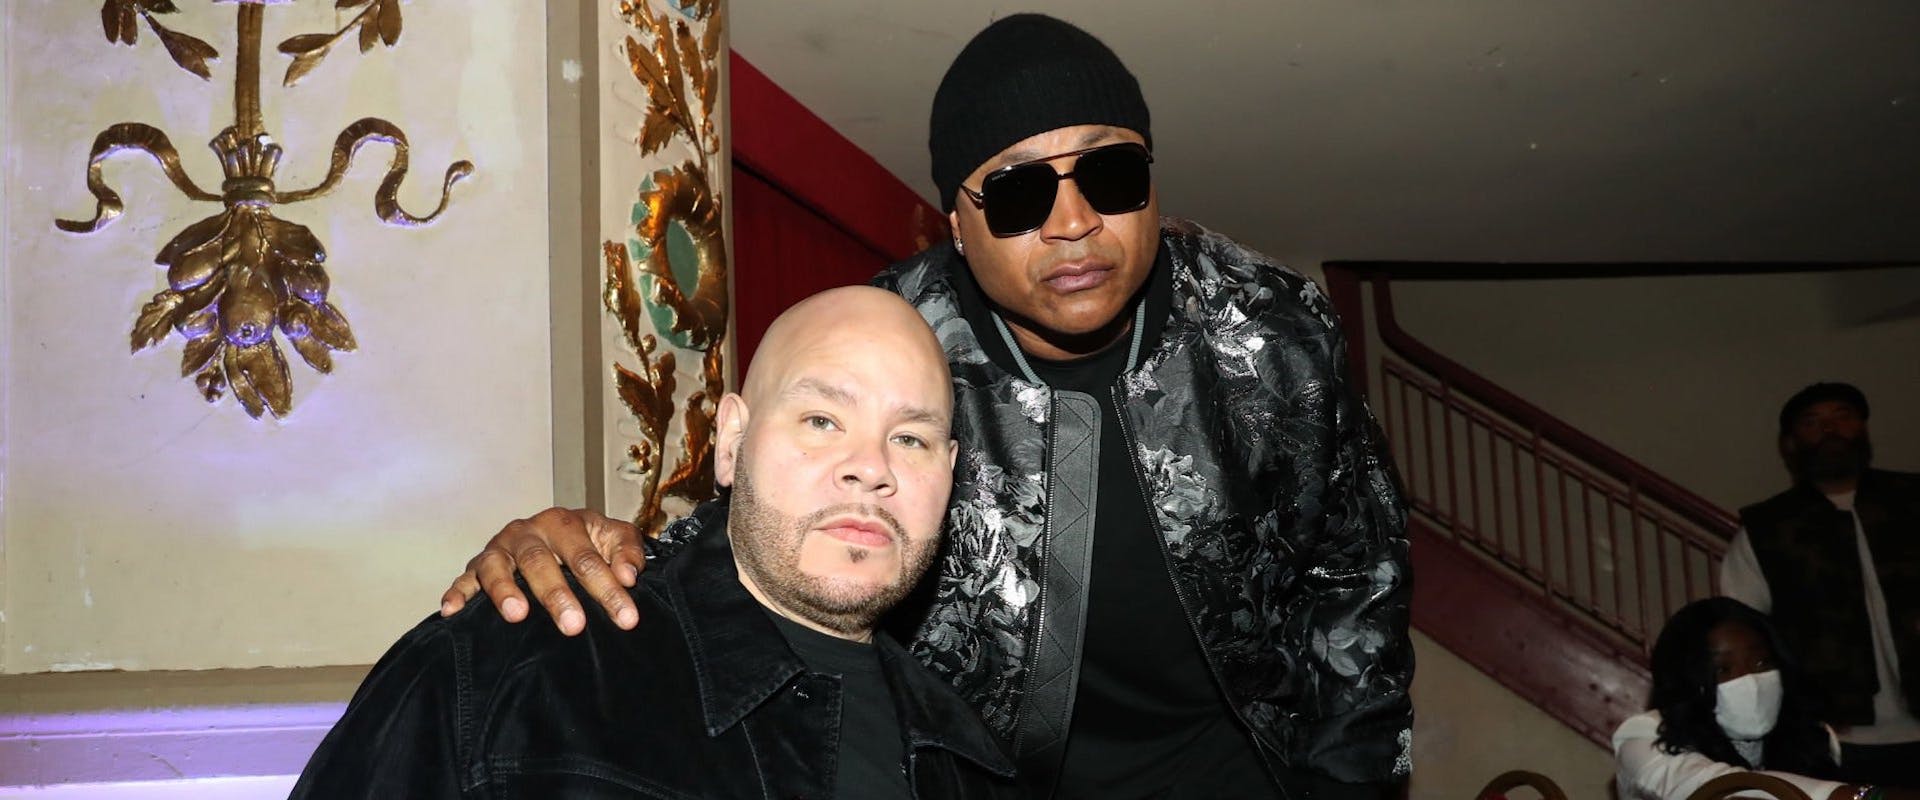 Fat Joe and LL Cool J attend the Memorial Service for DJ Kay Slay at The Apollo Theater on April 24, 2022 in New York City. (Photo by Johnny Nunez/Getty Images)